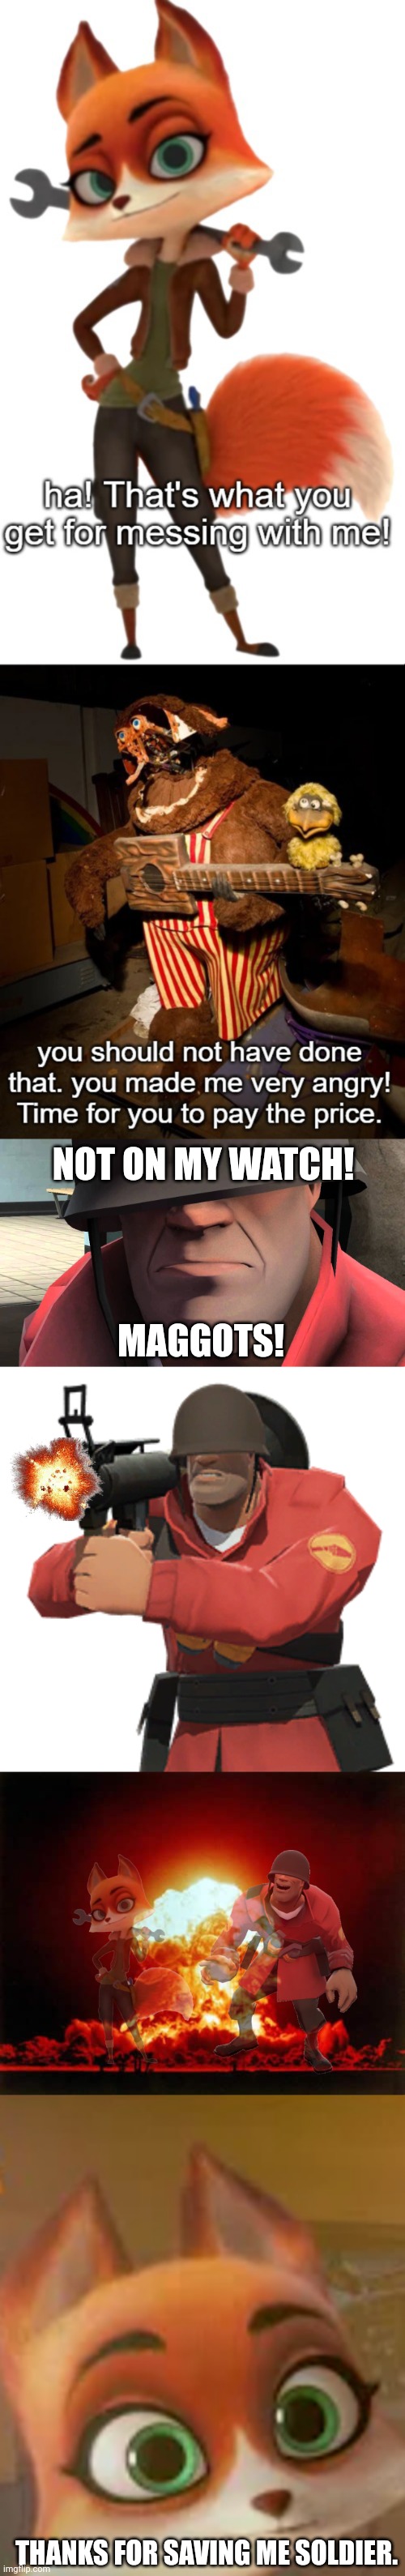 NOT ON MY WATCH! MAGGOTS! THANKS FOR SAVING ME SOLDIER. | image tagged in tf2 soldier,memes,nuclear explosion,jade being curious | made w/ Imgflip meme maker